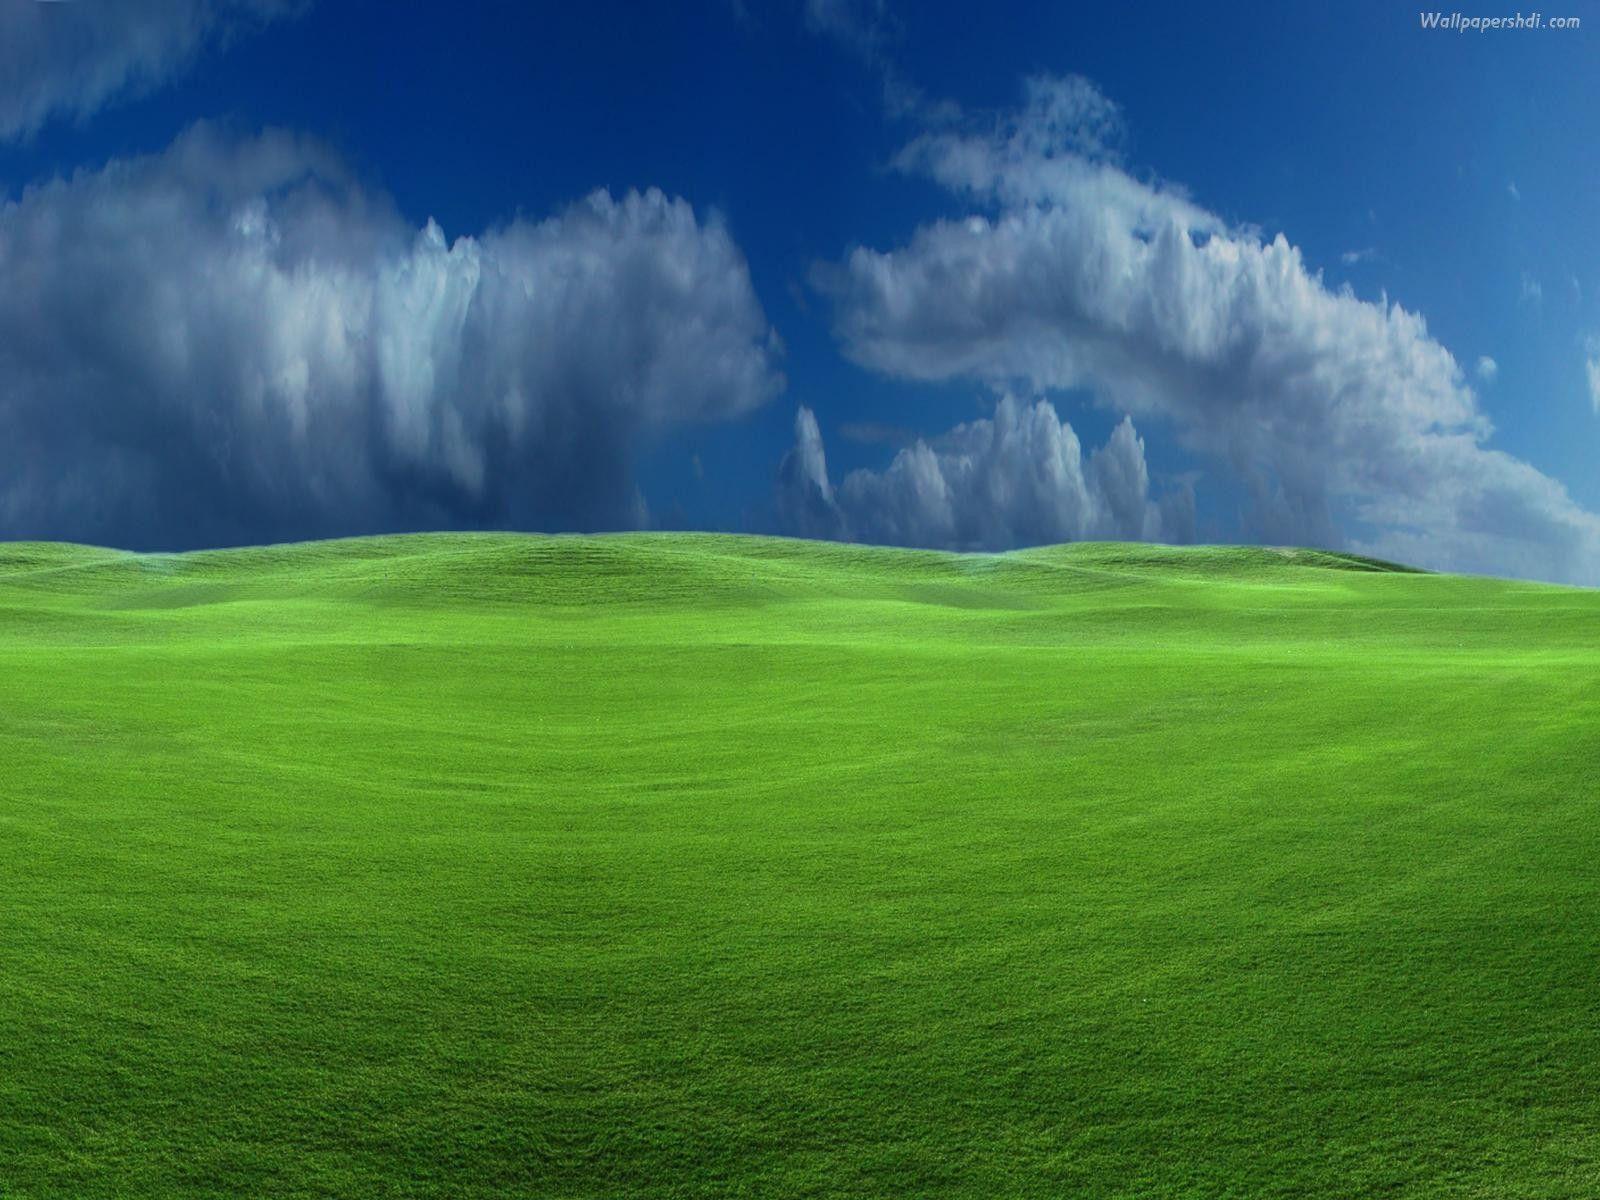 Windows Xp Hd Wallpapers Free Download Wallpapers